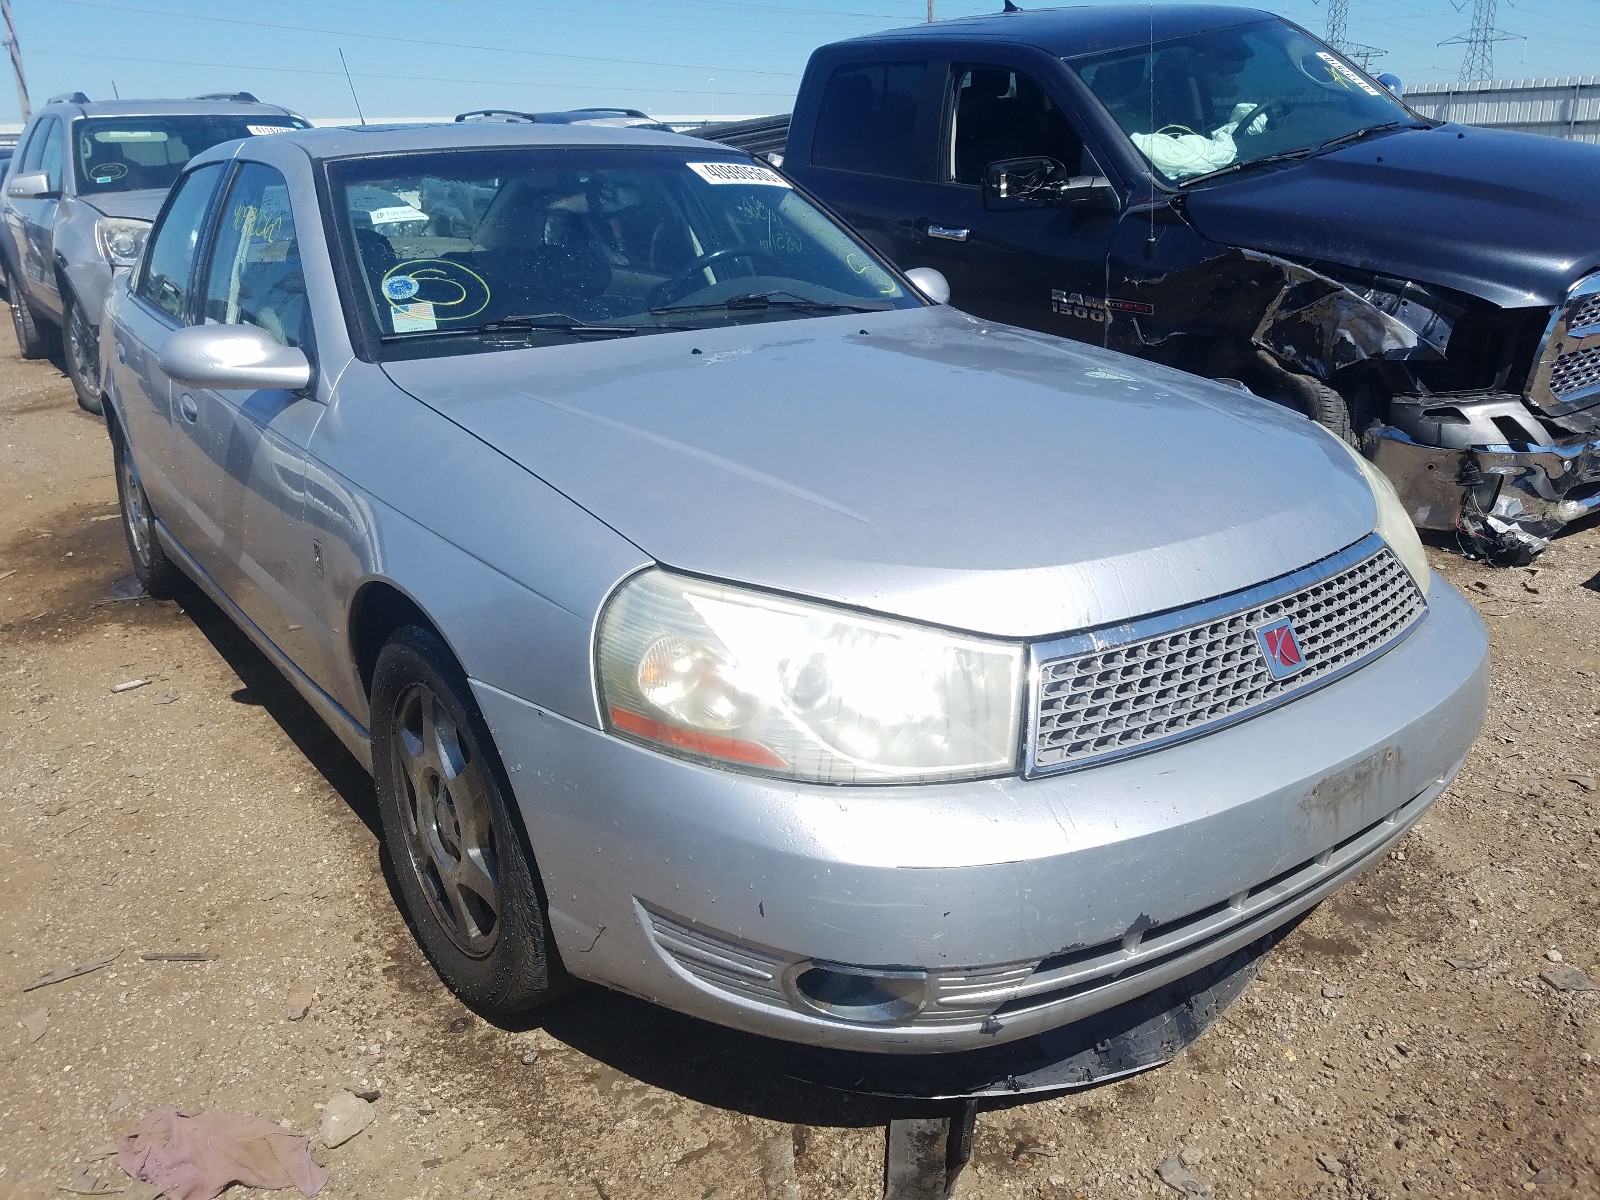 2003 saturn l200 for sale at copart elgin il lot 40990560 salvagereseller com salvagereseller com